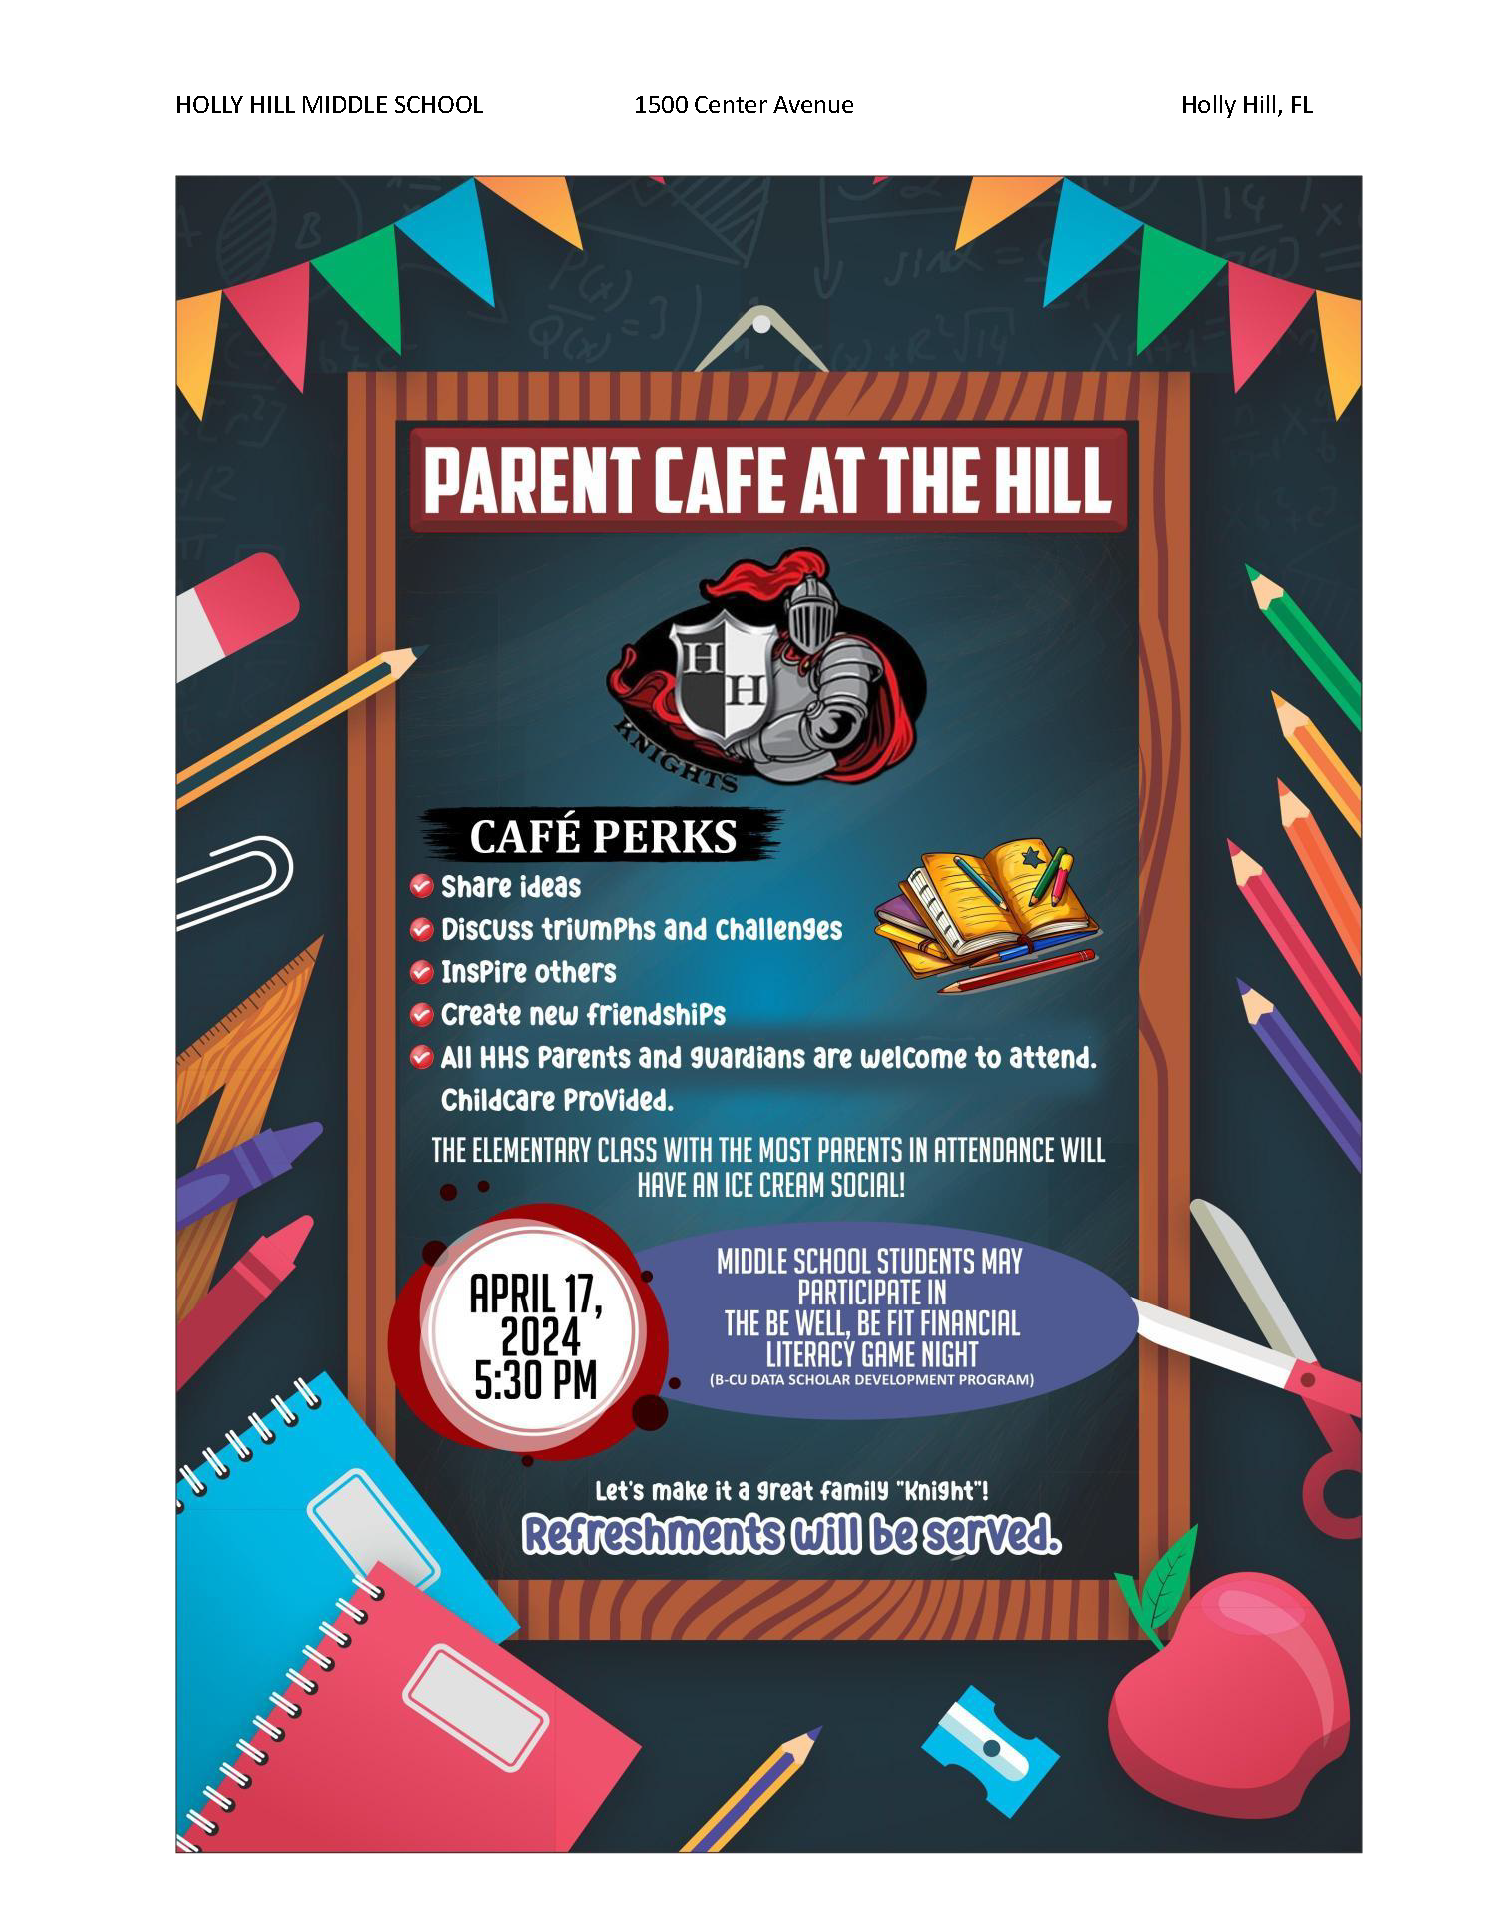 Parent Cafe at the Hill